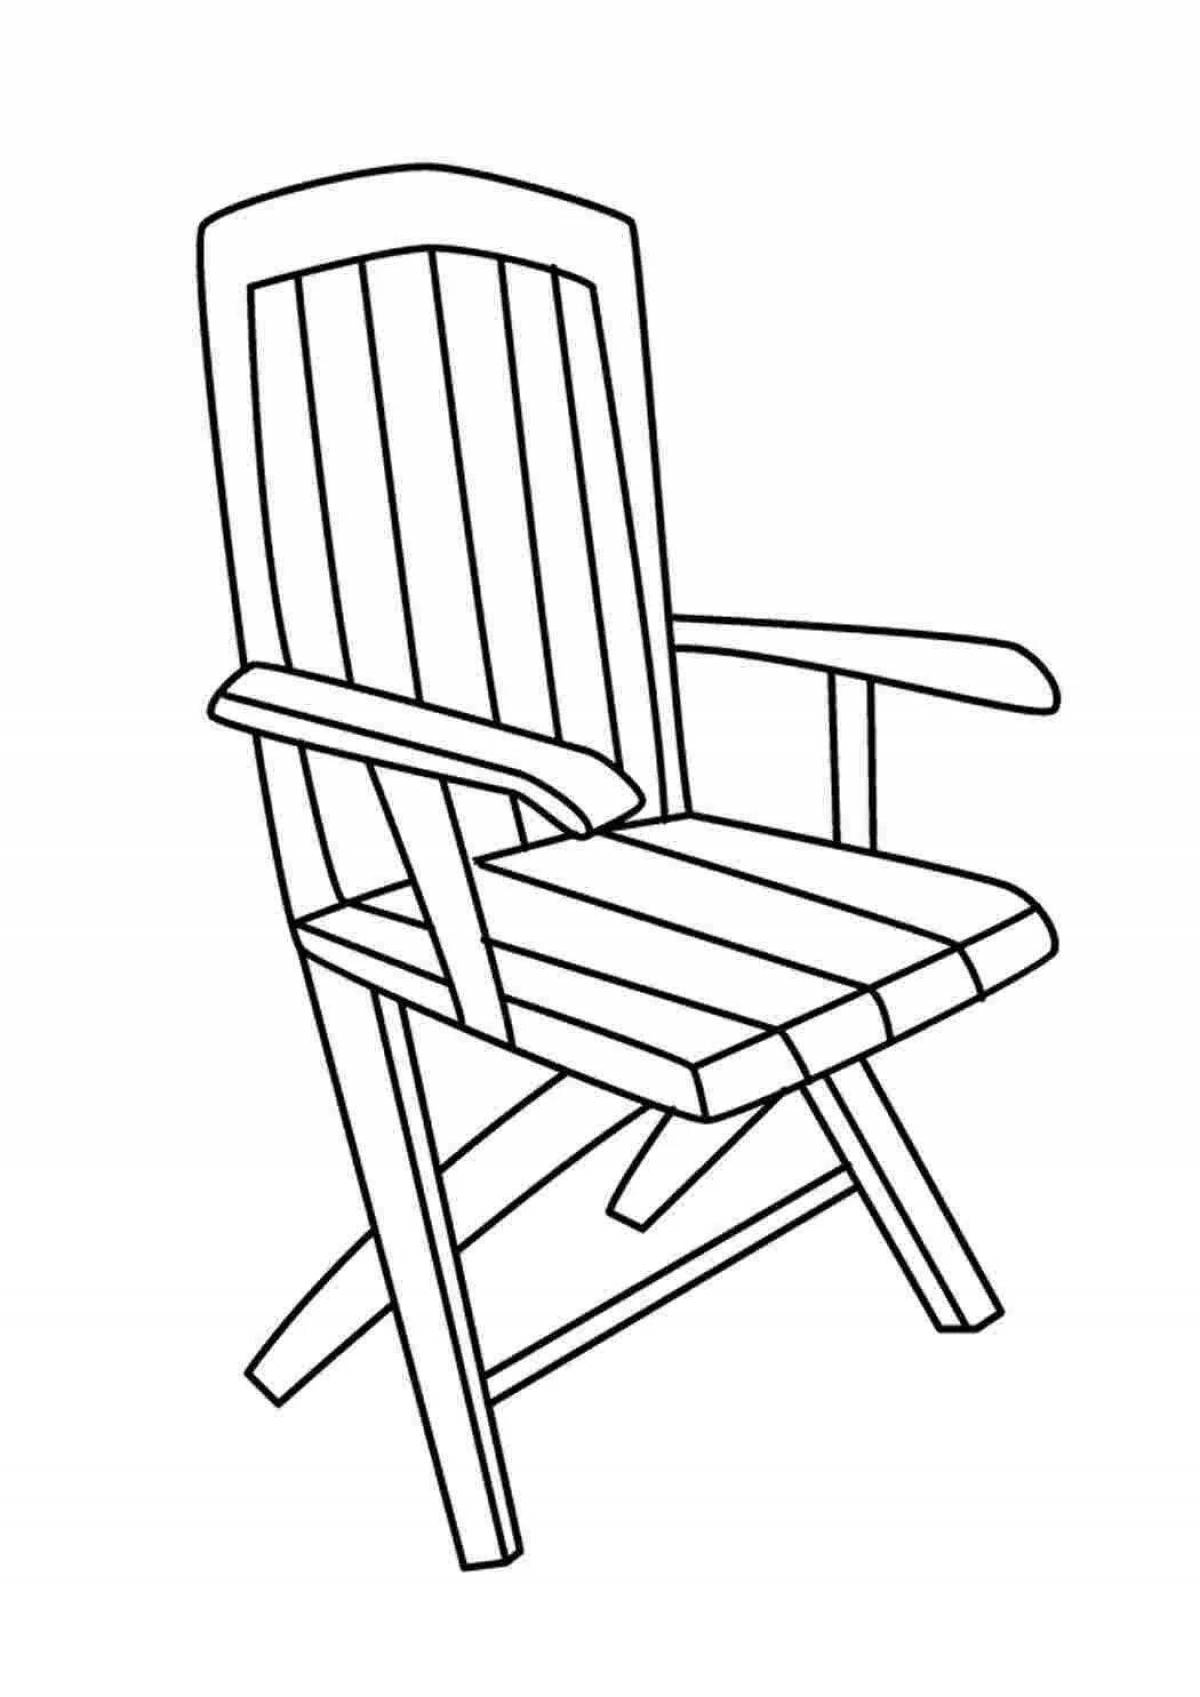 Coloring book funny high chair